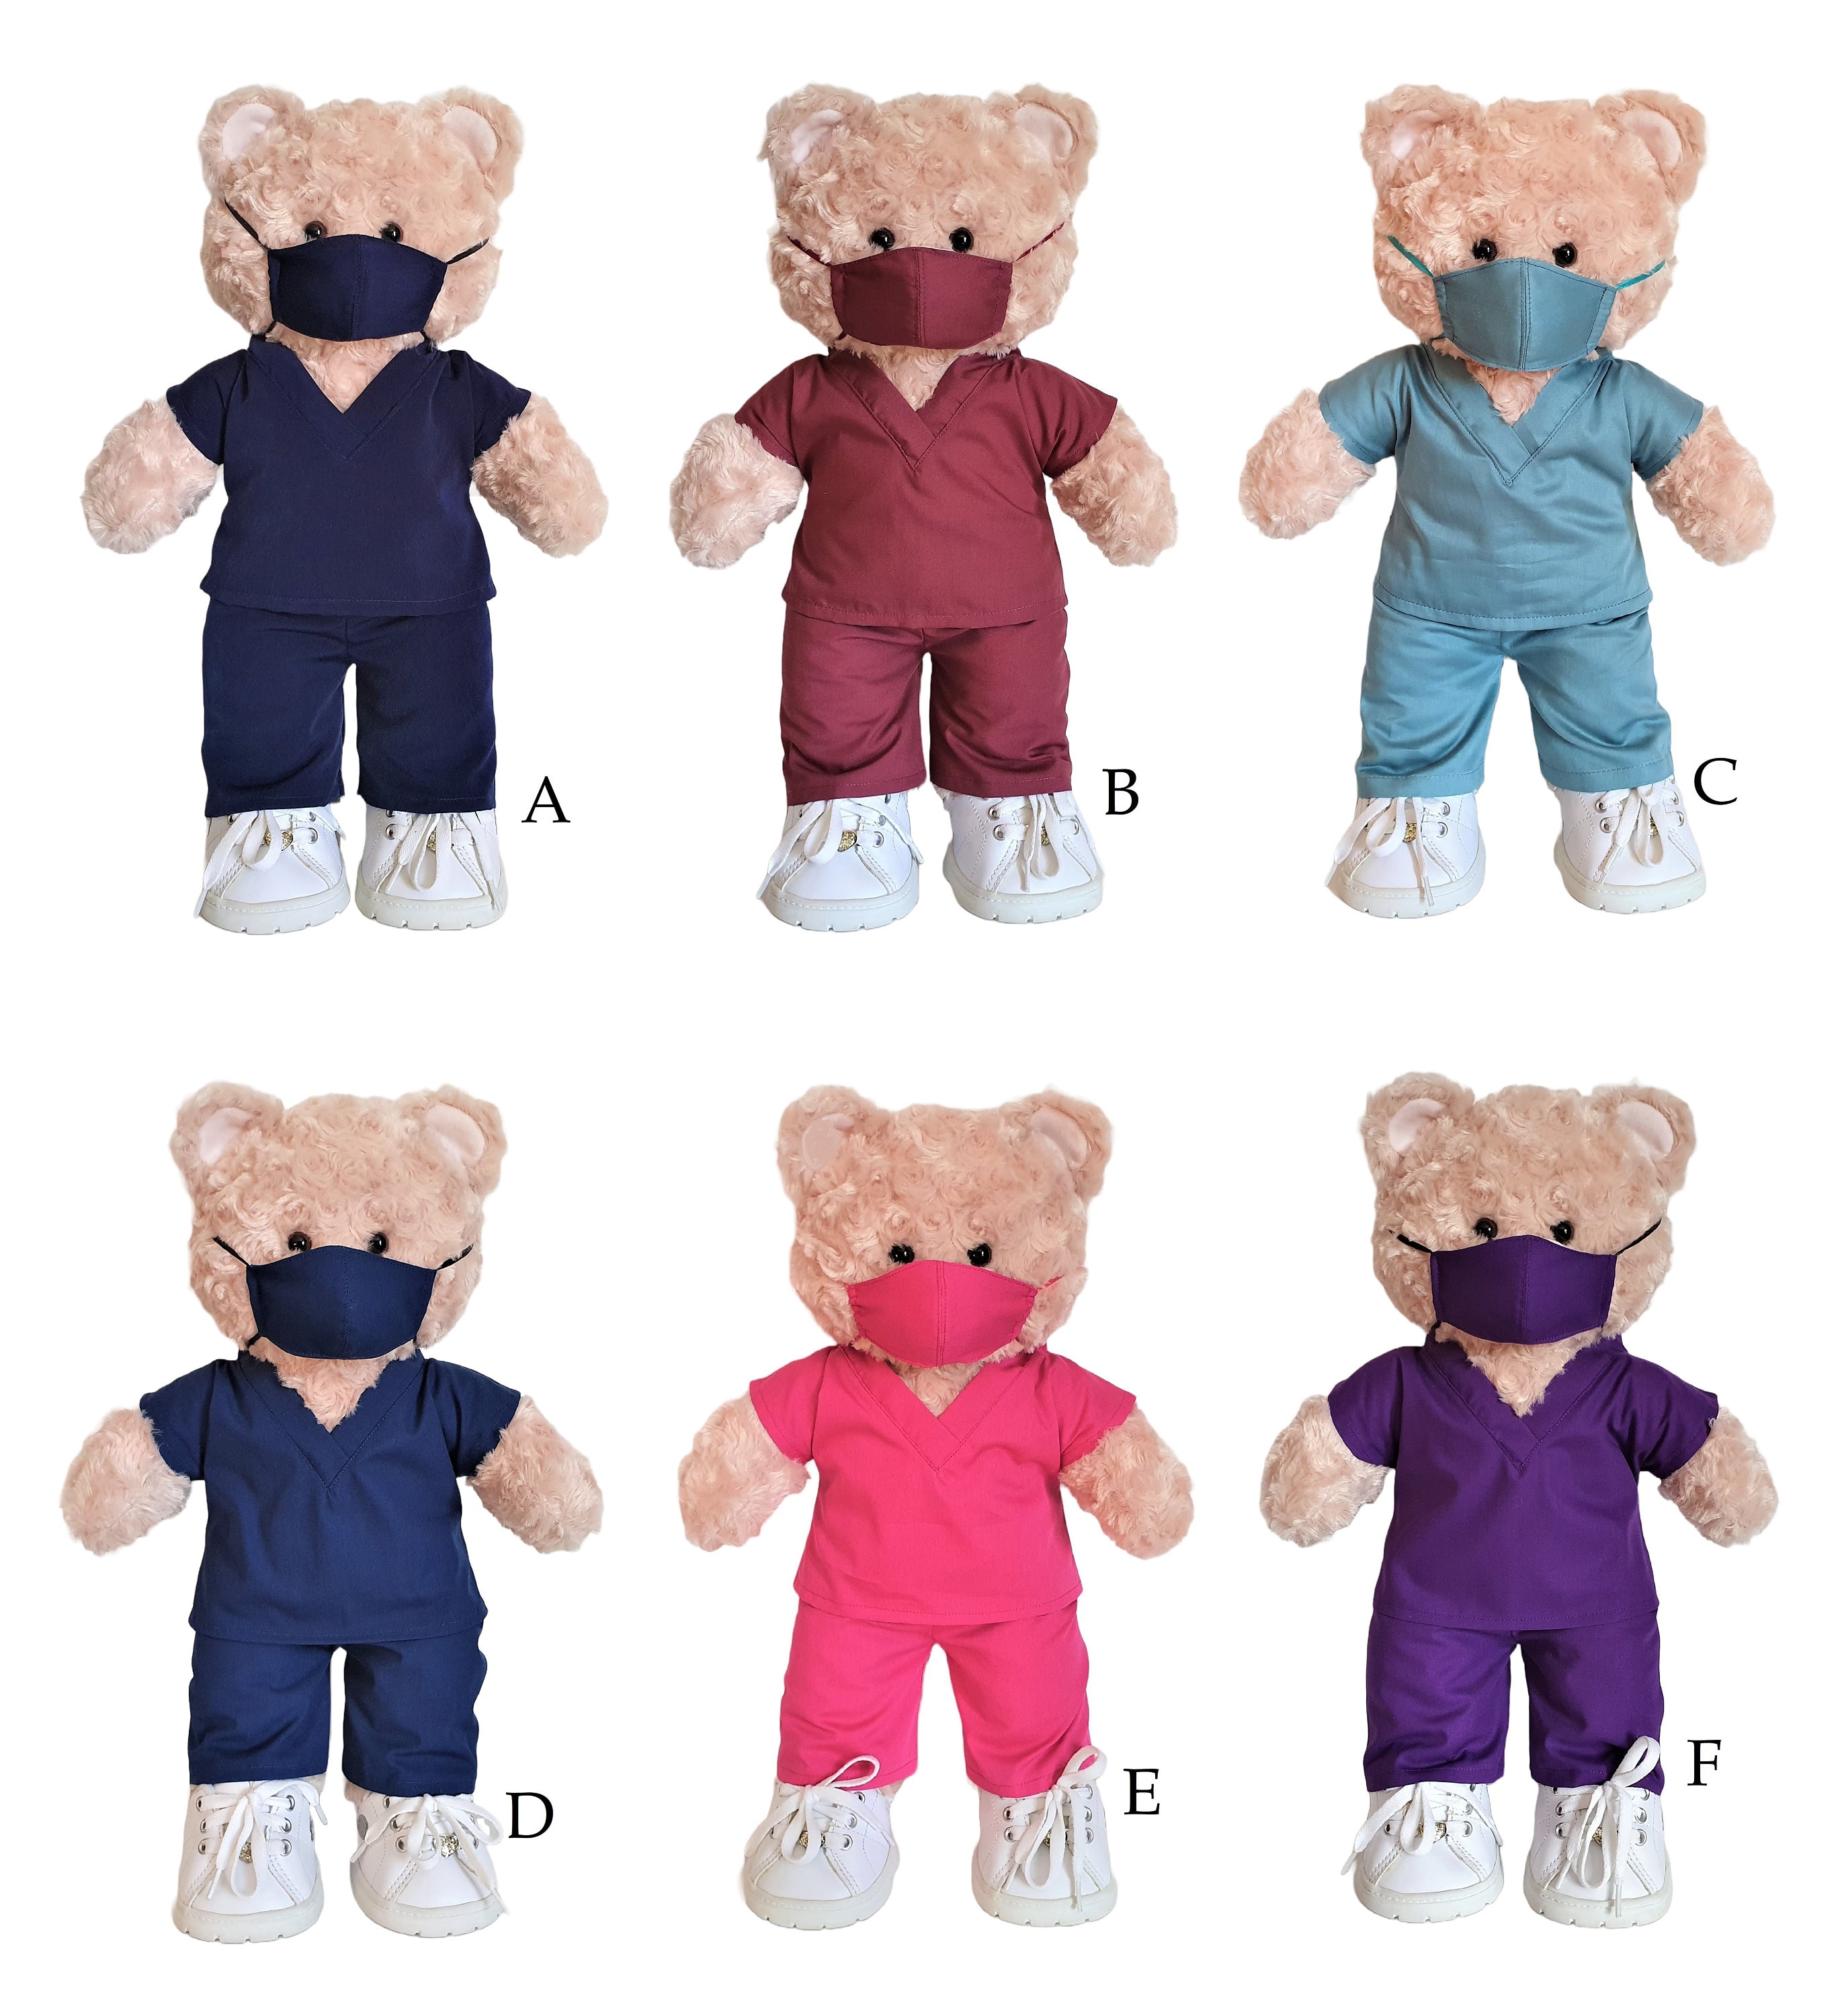 HollyHOME Doctor Bear Stuffed Animal Plush Teddy Bear in Scrubs and White  Coat Gifts for Doctors Students and Kids 10 Inch